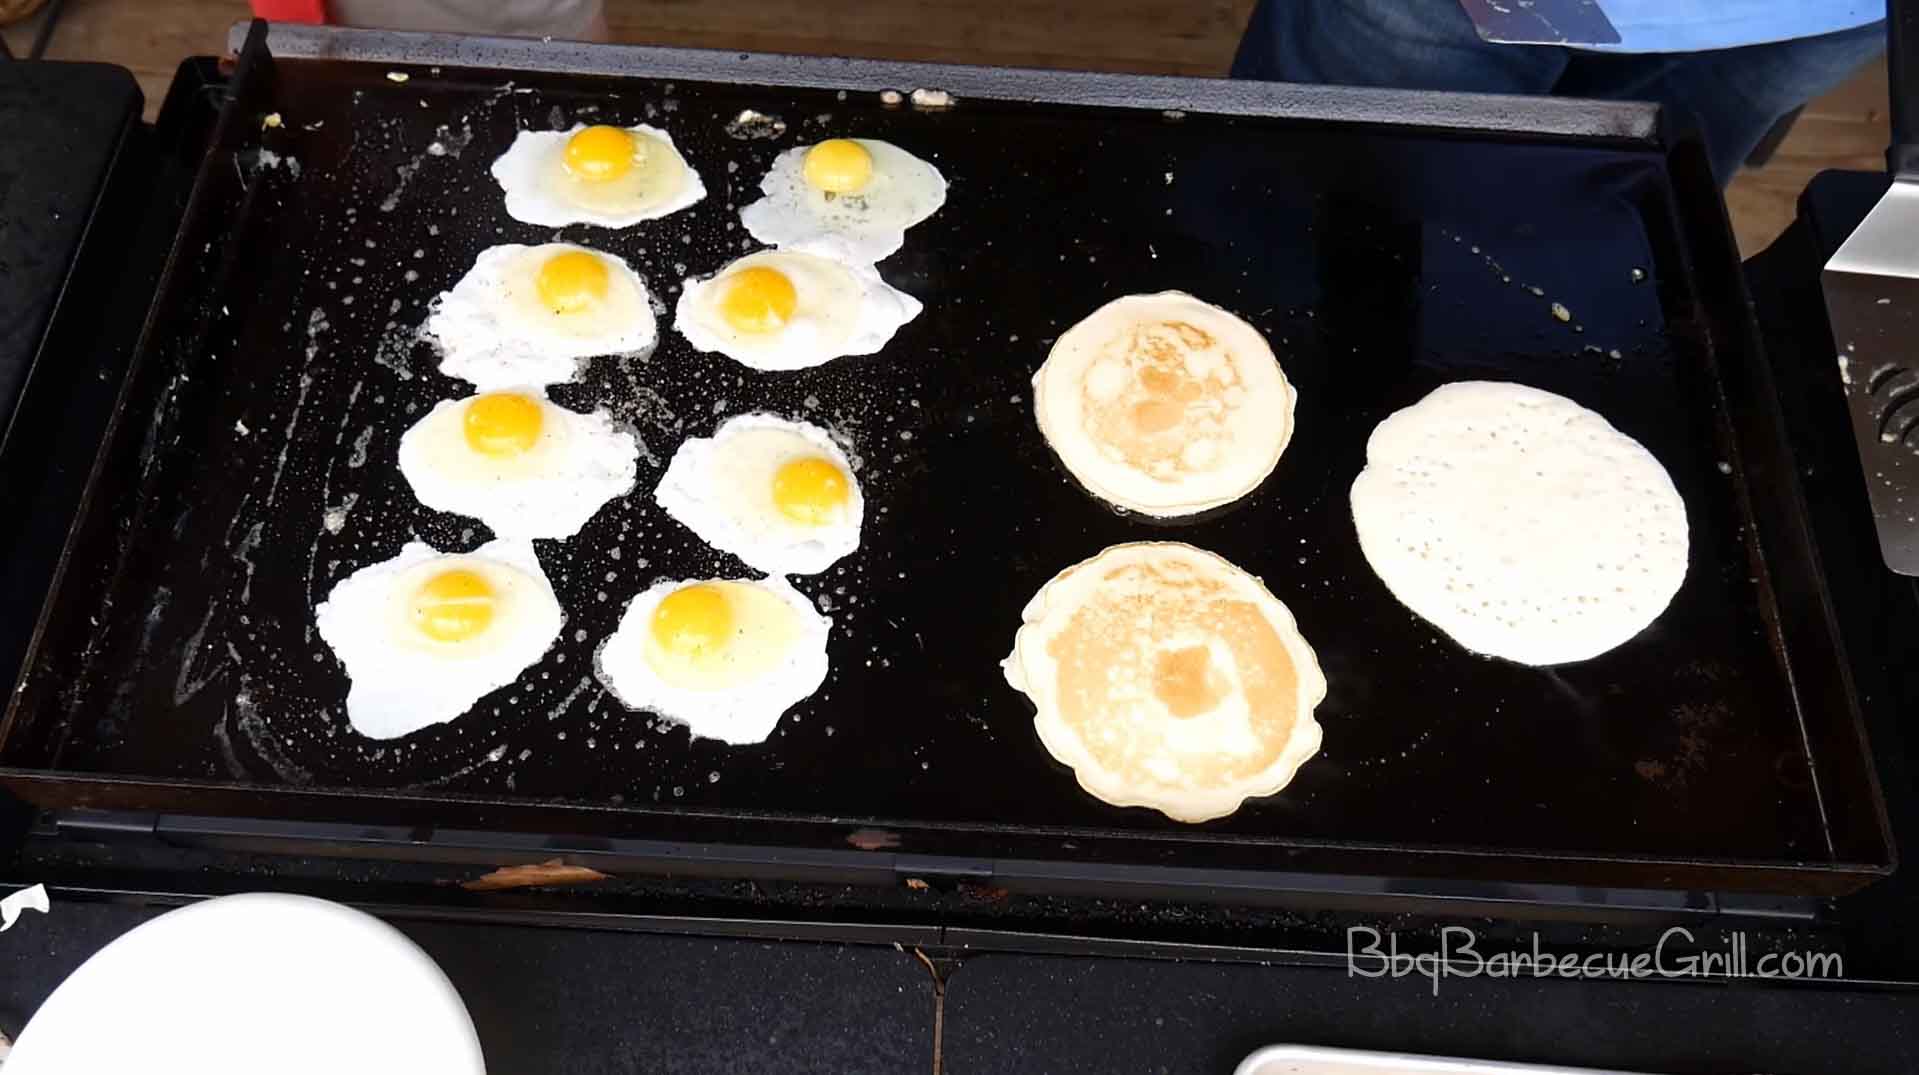 Flat top grill vs griddle